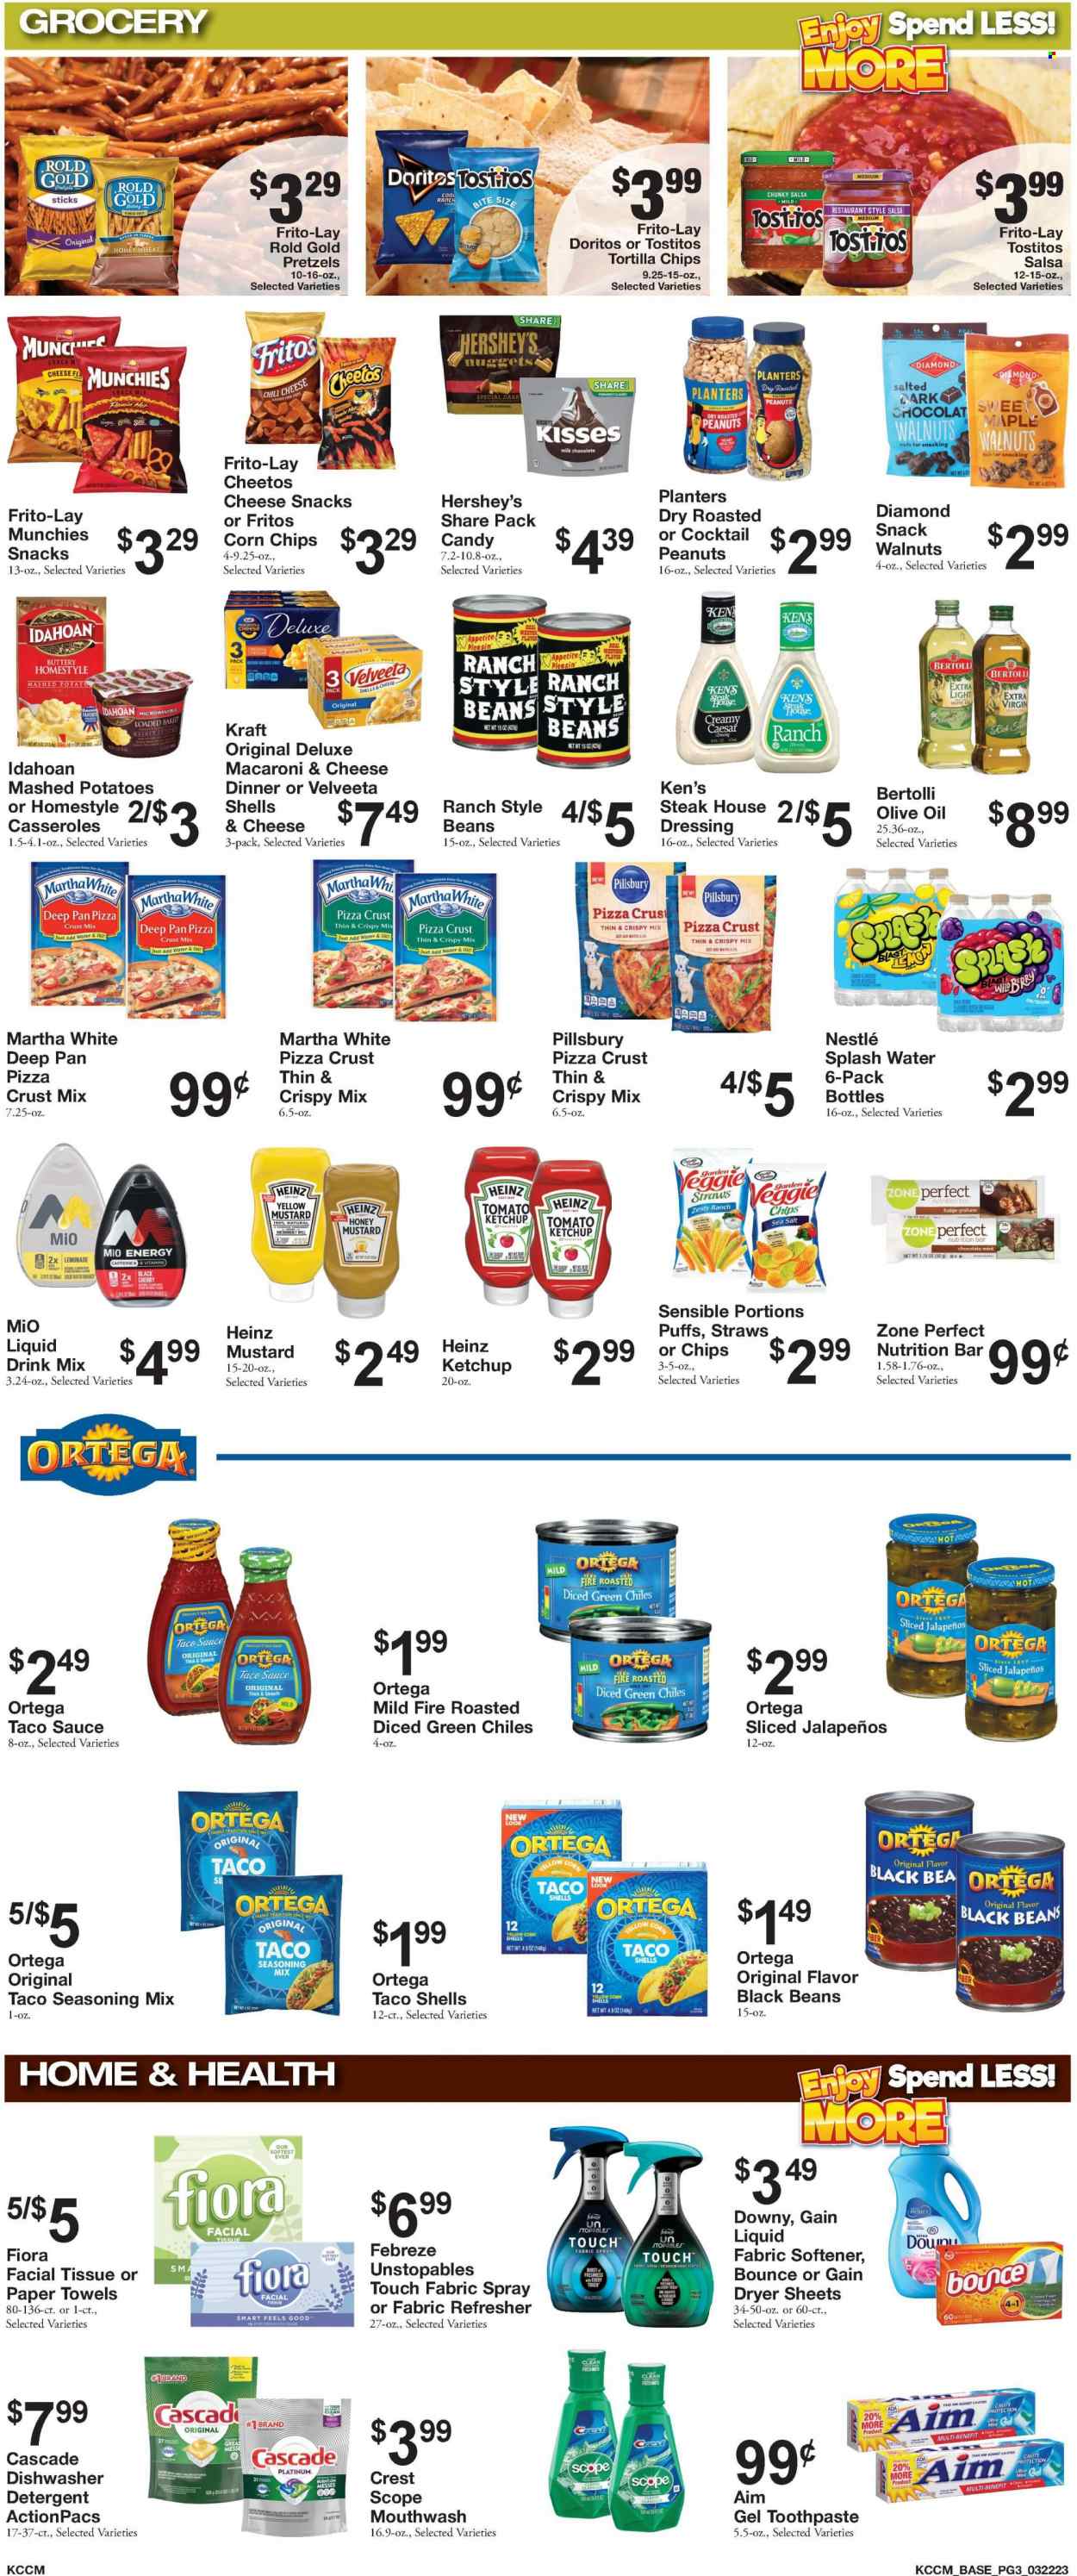 thumbnail - Bratchers Market Flyer - 03/22/2023 - 03/28/2023 - Sales products - pretzels, puffs, beans, cherries, macaroni & cheese, mashed potatoes, pizza, nuggets, sauce, Pillsbury, Kraft®, Bertolli, ranch dressing, Hershey's, fudge, milk chocolate, Nestlé, chocolate, snack, Doritos, Fritos, tortilla chips, Cheetos, chips, corn chips, Frito-Lay, Tostitos, black beans, Heinz, Zone Perfect, spice, caesar dressing, mustard, taco sauce, honey mustard, ketchup, dressing, salsa, extra virgin olive oil, olive oil, oil, roasted peanuts, walnuts, peanuts, Planters, lemonade, flavored water, water, steak, tissues, kitchen towels, paper towels, detergent, Febreze, Gain, Cascade, Unstopables, fabric softener, dryer sheets, toothpaste, mouthwash, Crest, refresher. Page 3.